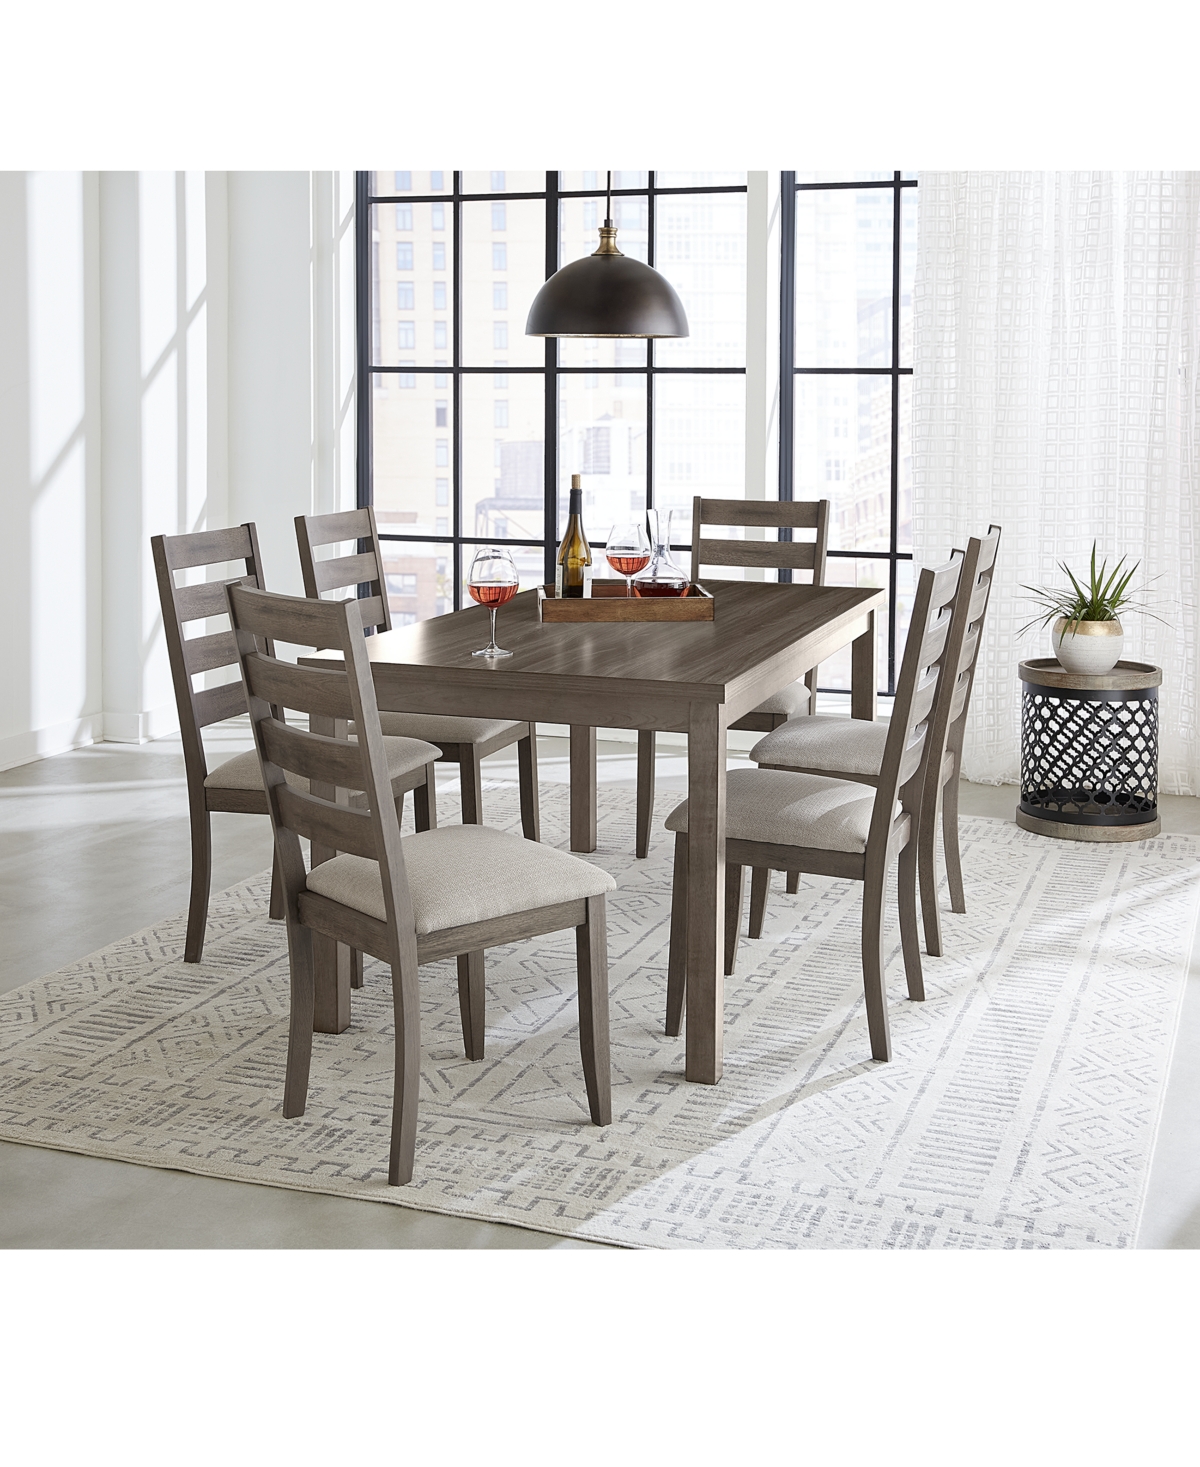 Macy's Closeout! Max Meadows Laminate 7-pc Dining Set (rectangular Trestle Table + 6 Side Chairs) In Light Brown